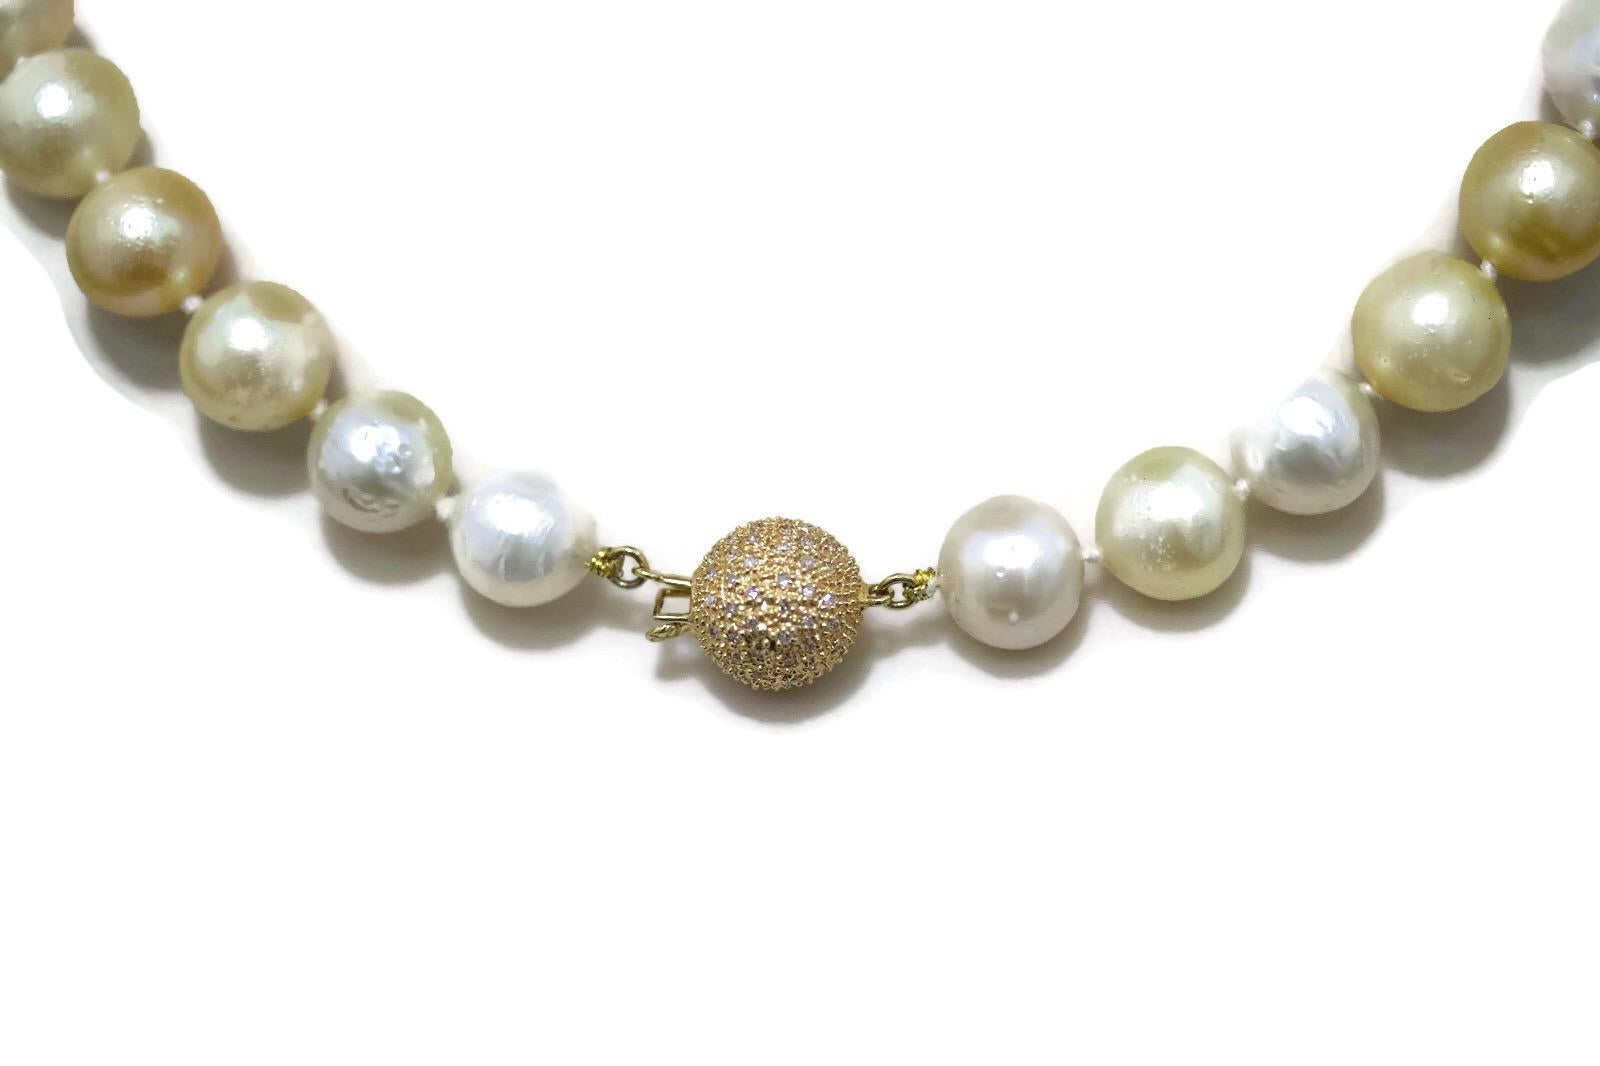 This stunning Golden and White South Sea Pearl Necklace With An 14k Yellow Gold Diamond Clasp is a basic classic South Sea Pearl necklace with a twist.  The combination of the yellow and white pearls make a very subtle and refined look to the